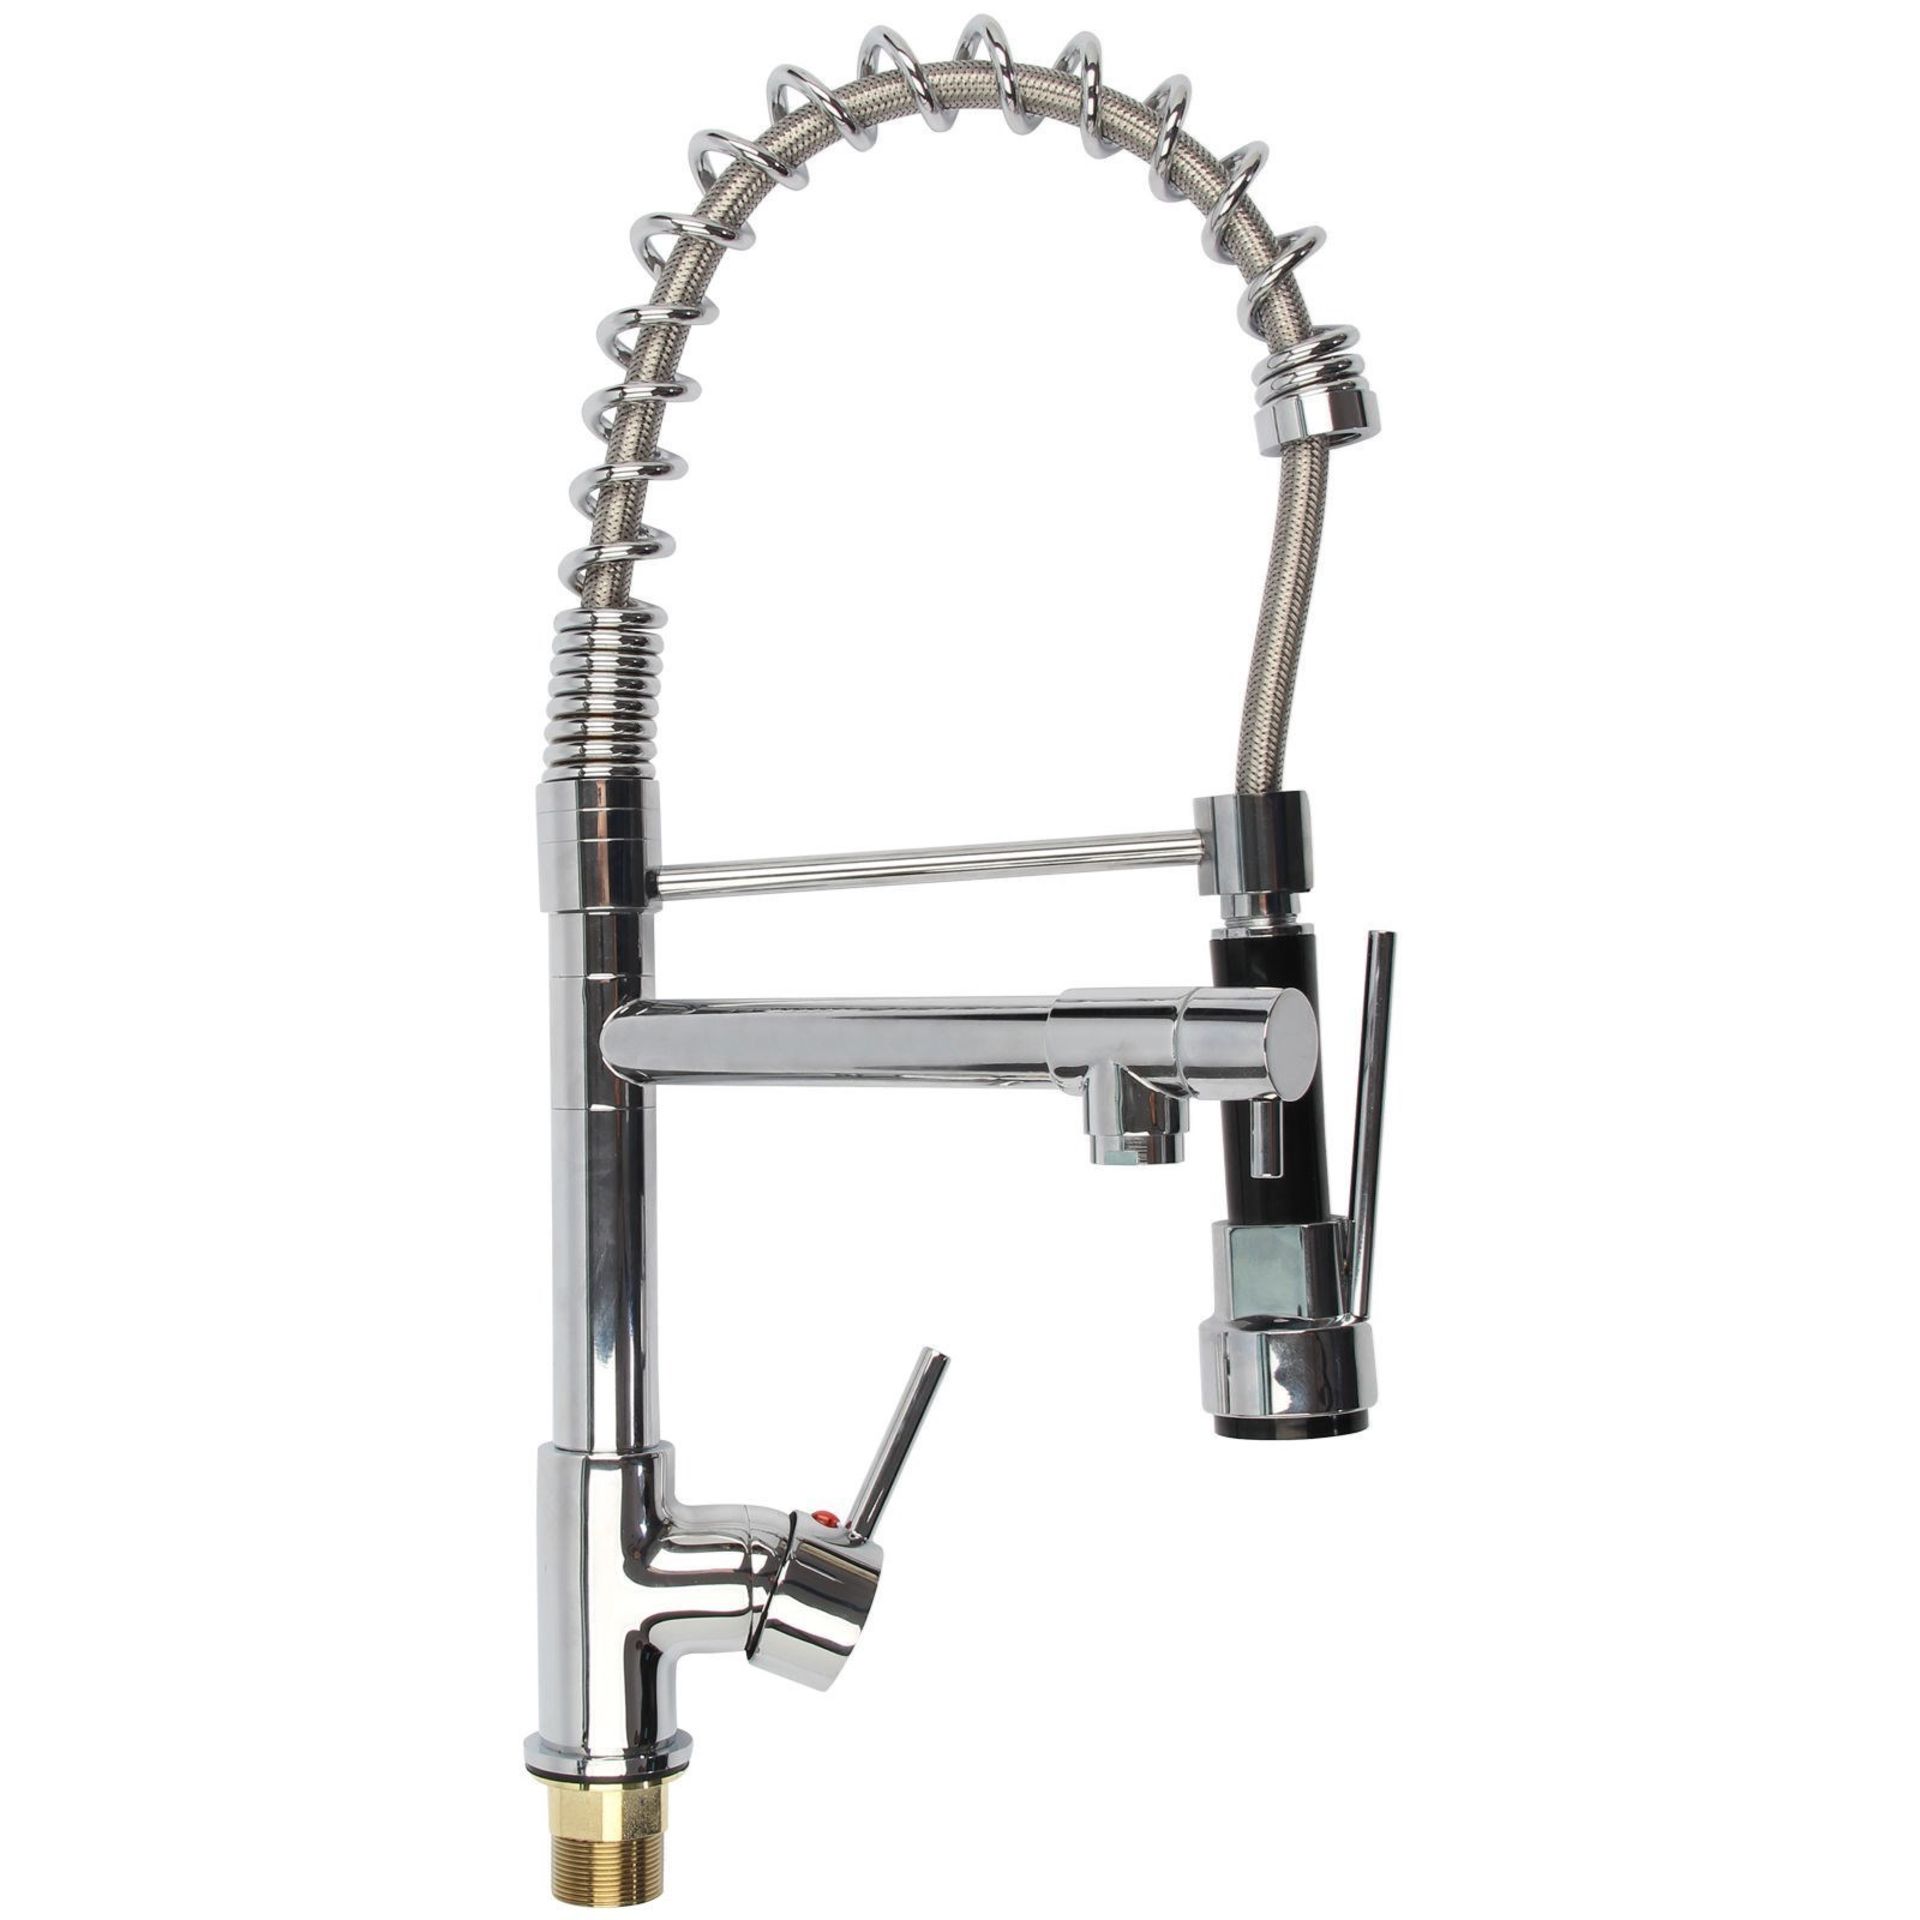 (MC220) Bentley Modern Monobloc Chrome Brass Pull Out Spray Mixer Tap. RRP £349.99. This tap is from - Image 4 of 4